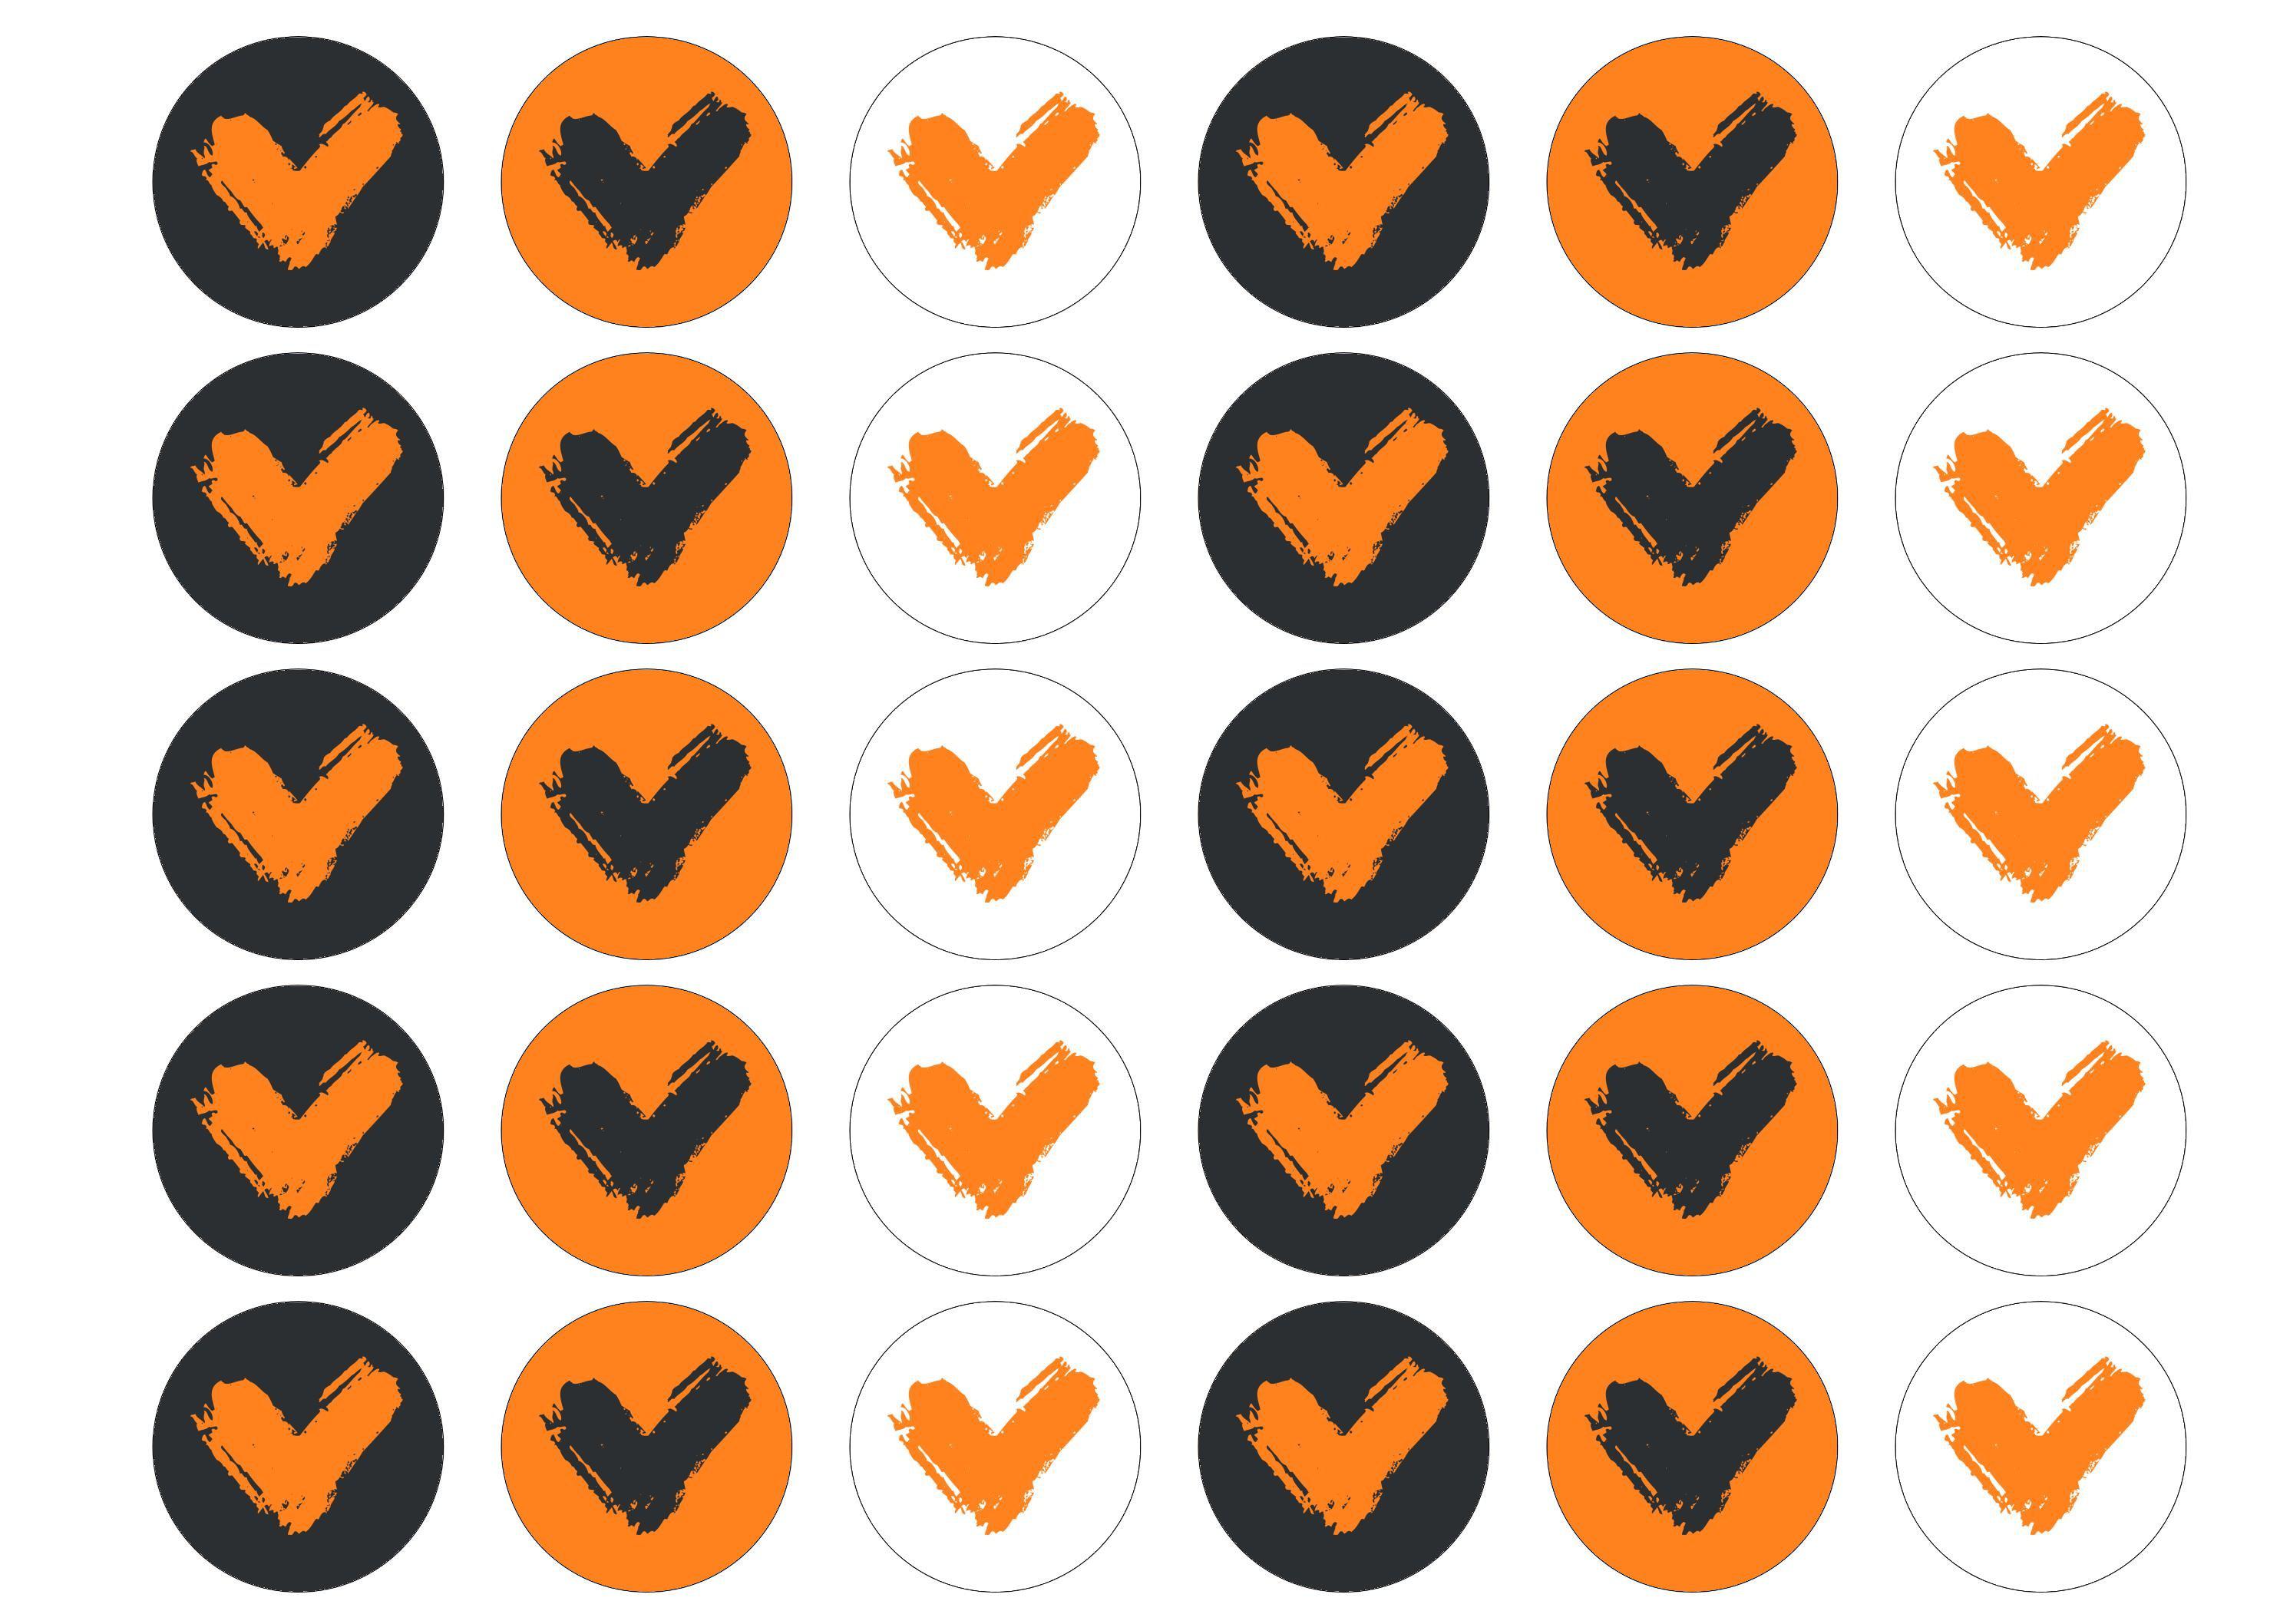 30 edible cupcake toppers with the Veganuary Orange icon